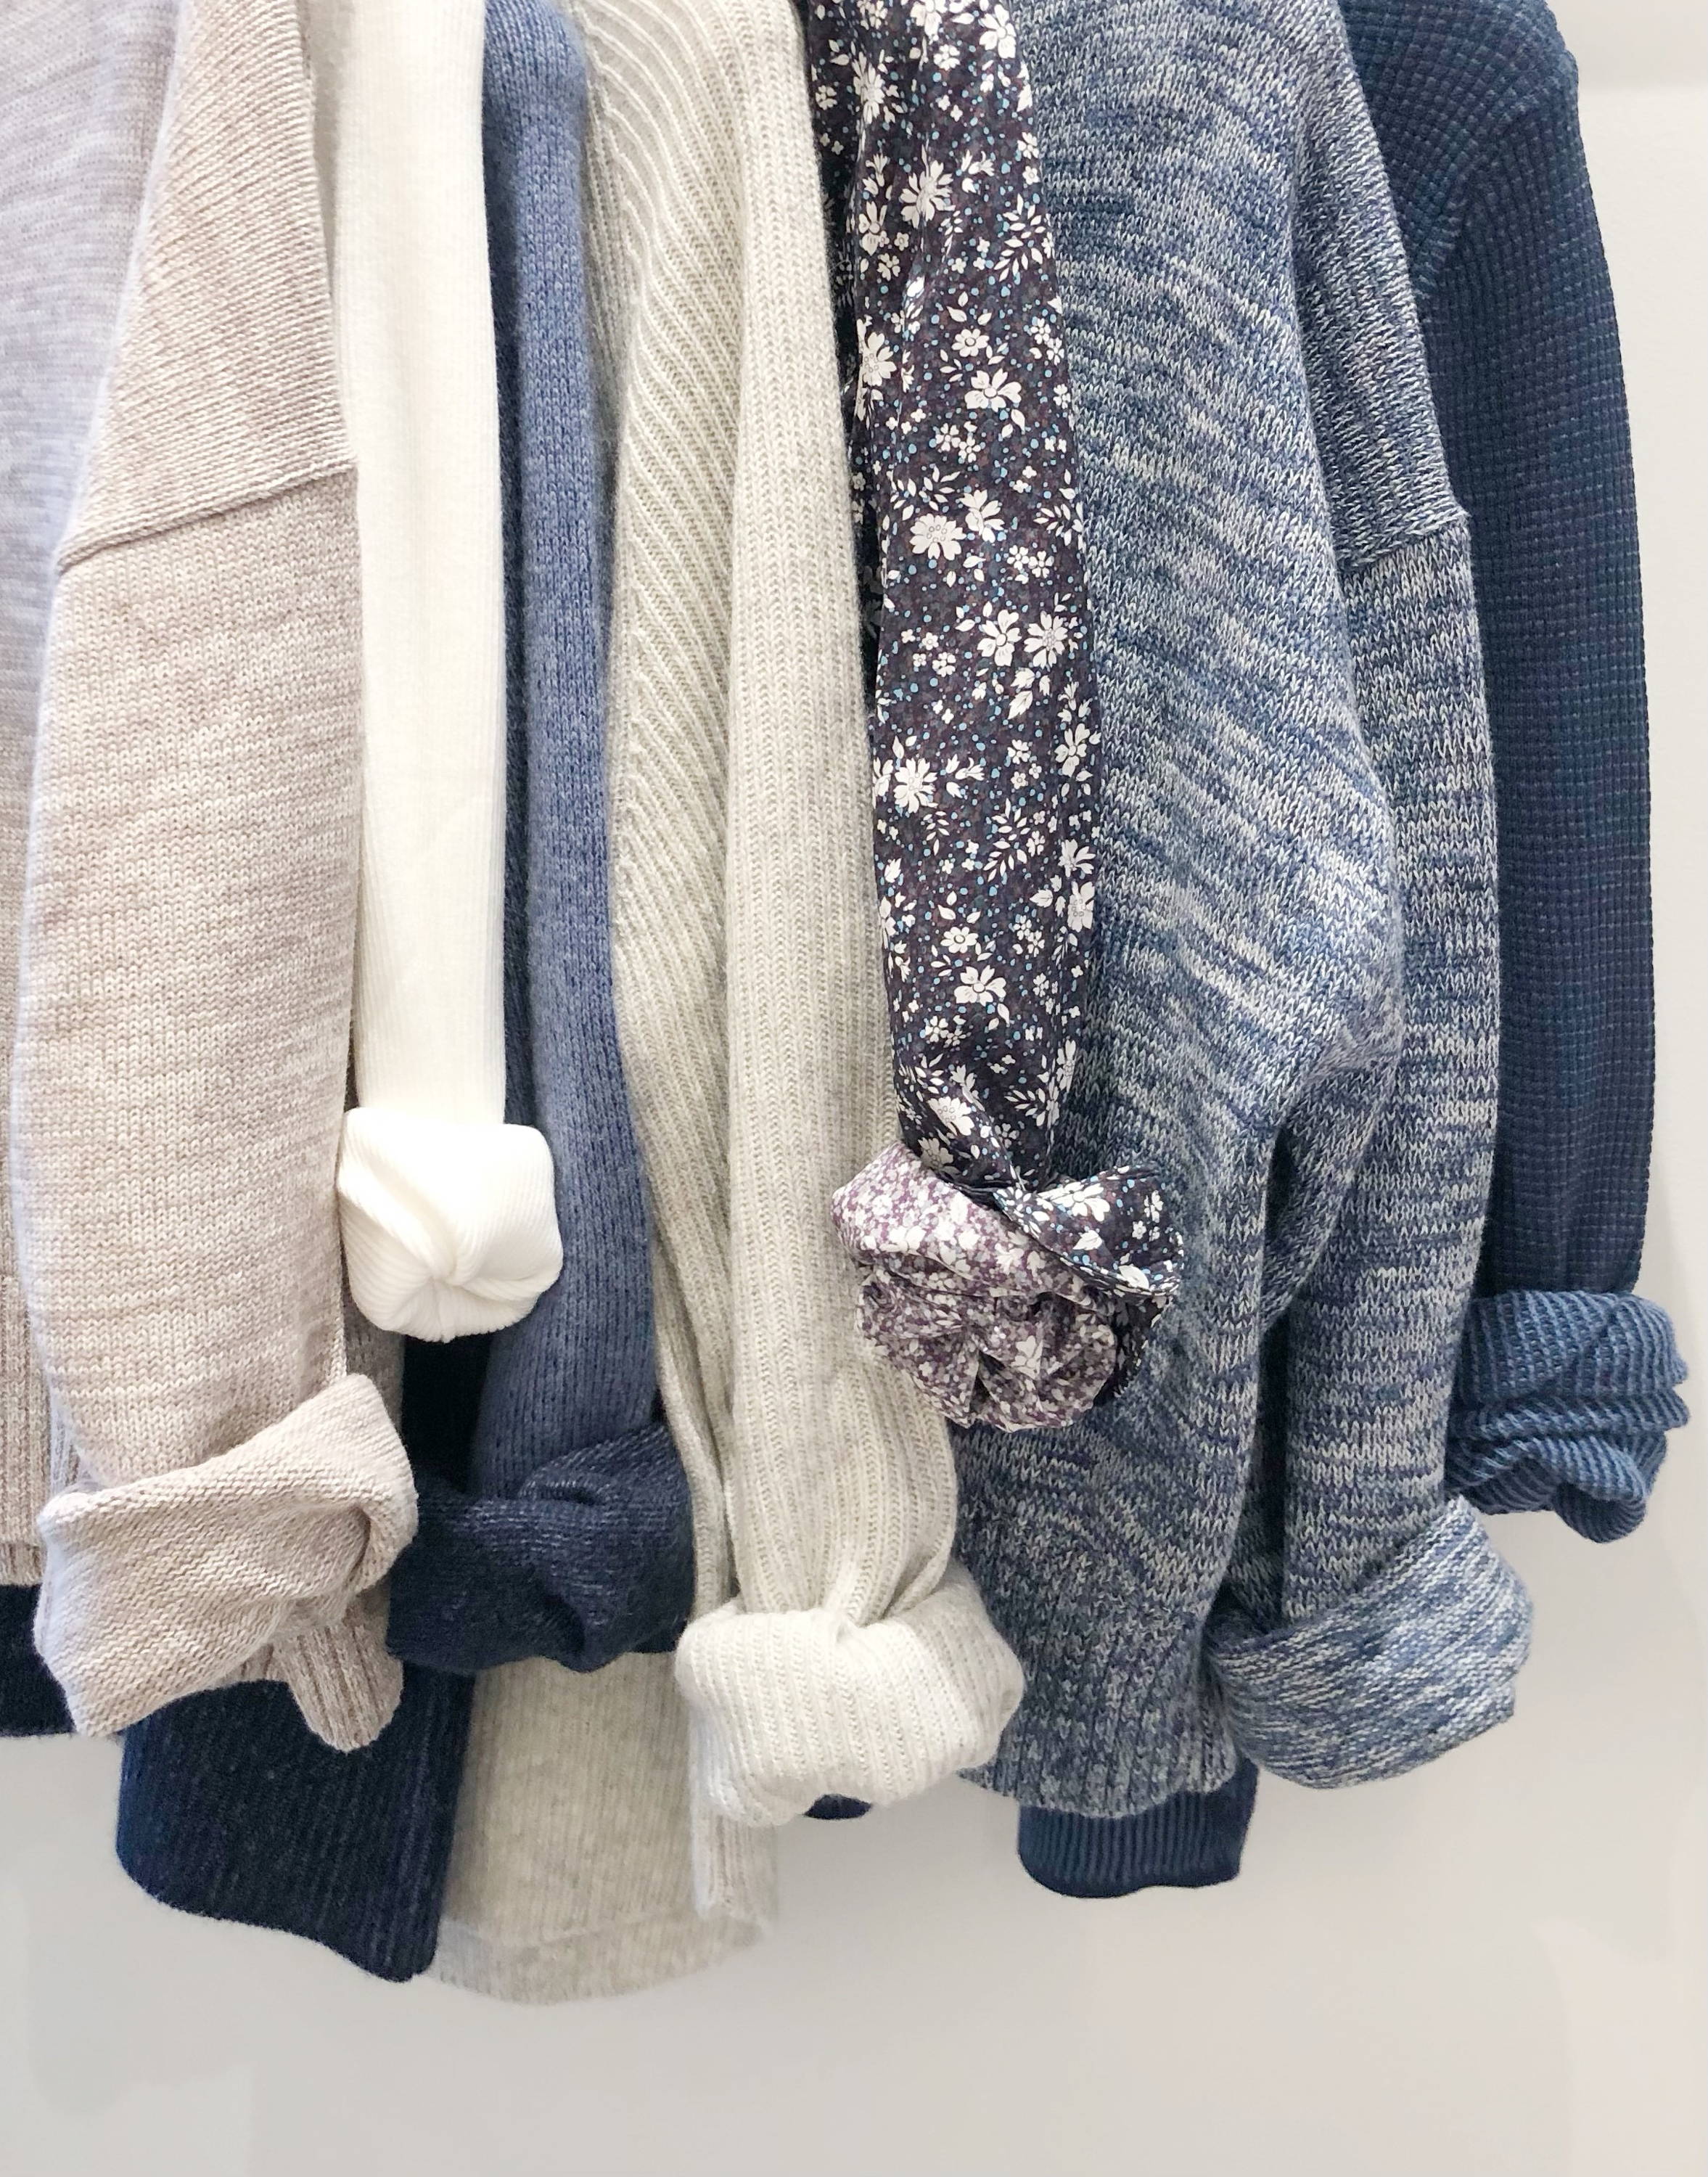 A rack of blue and grey sweaters and tops.